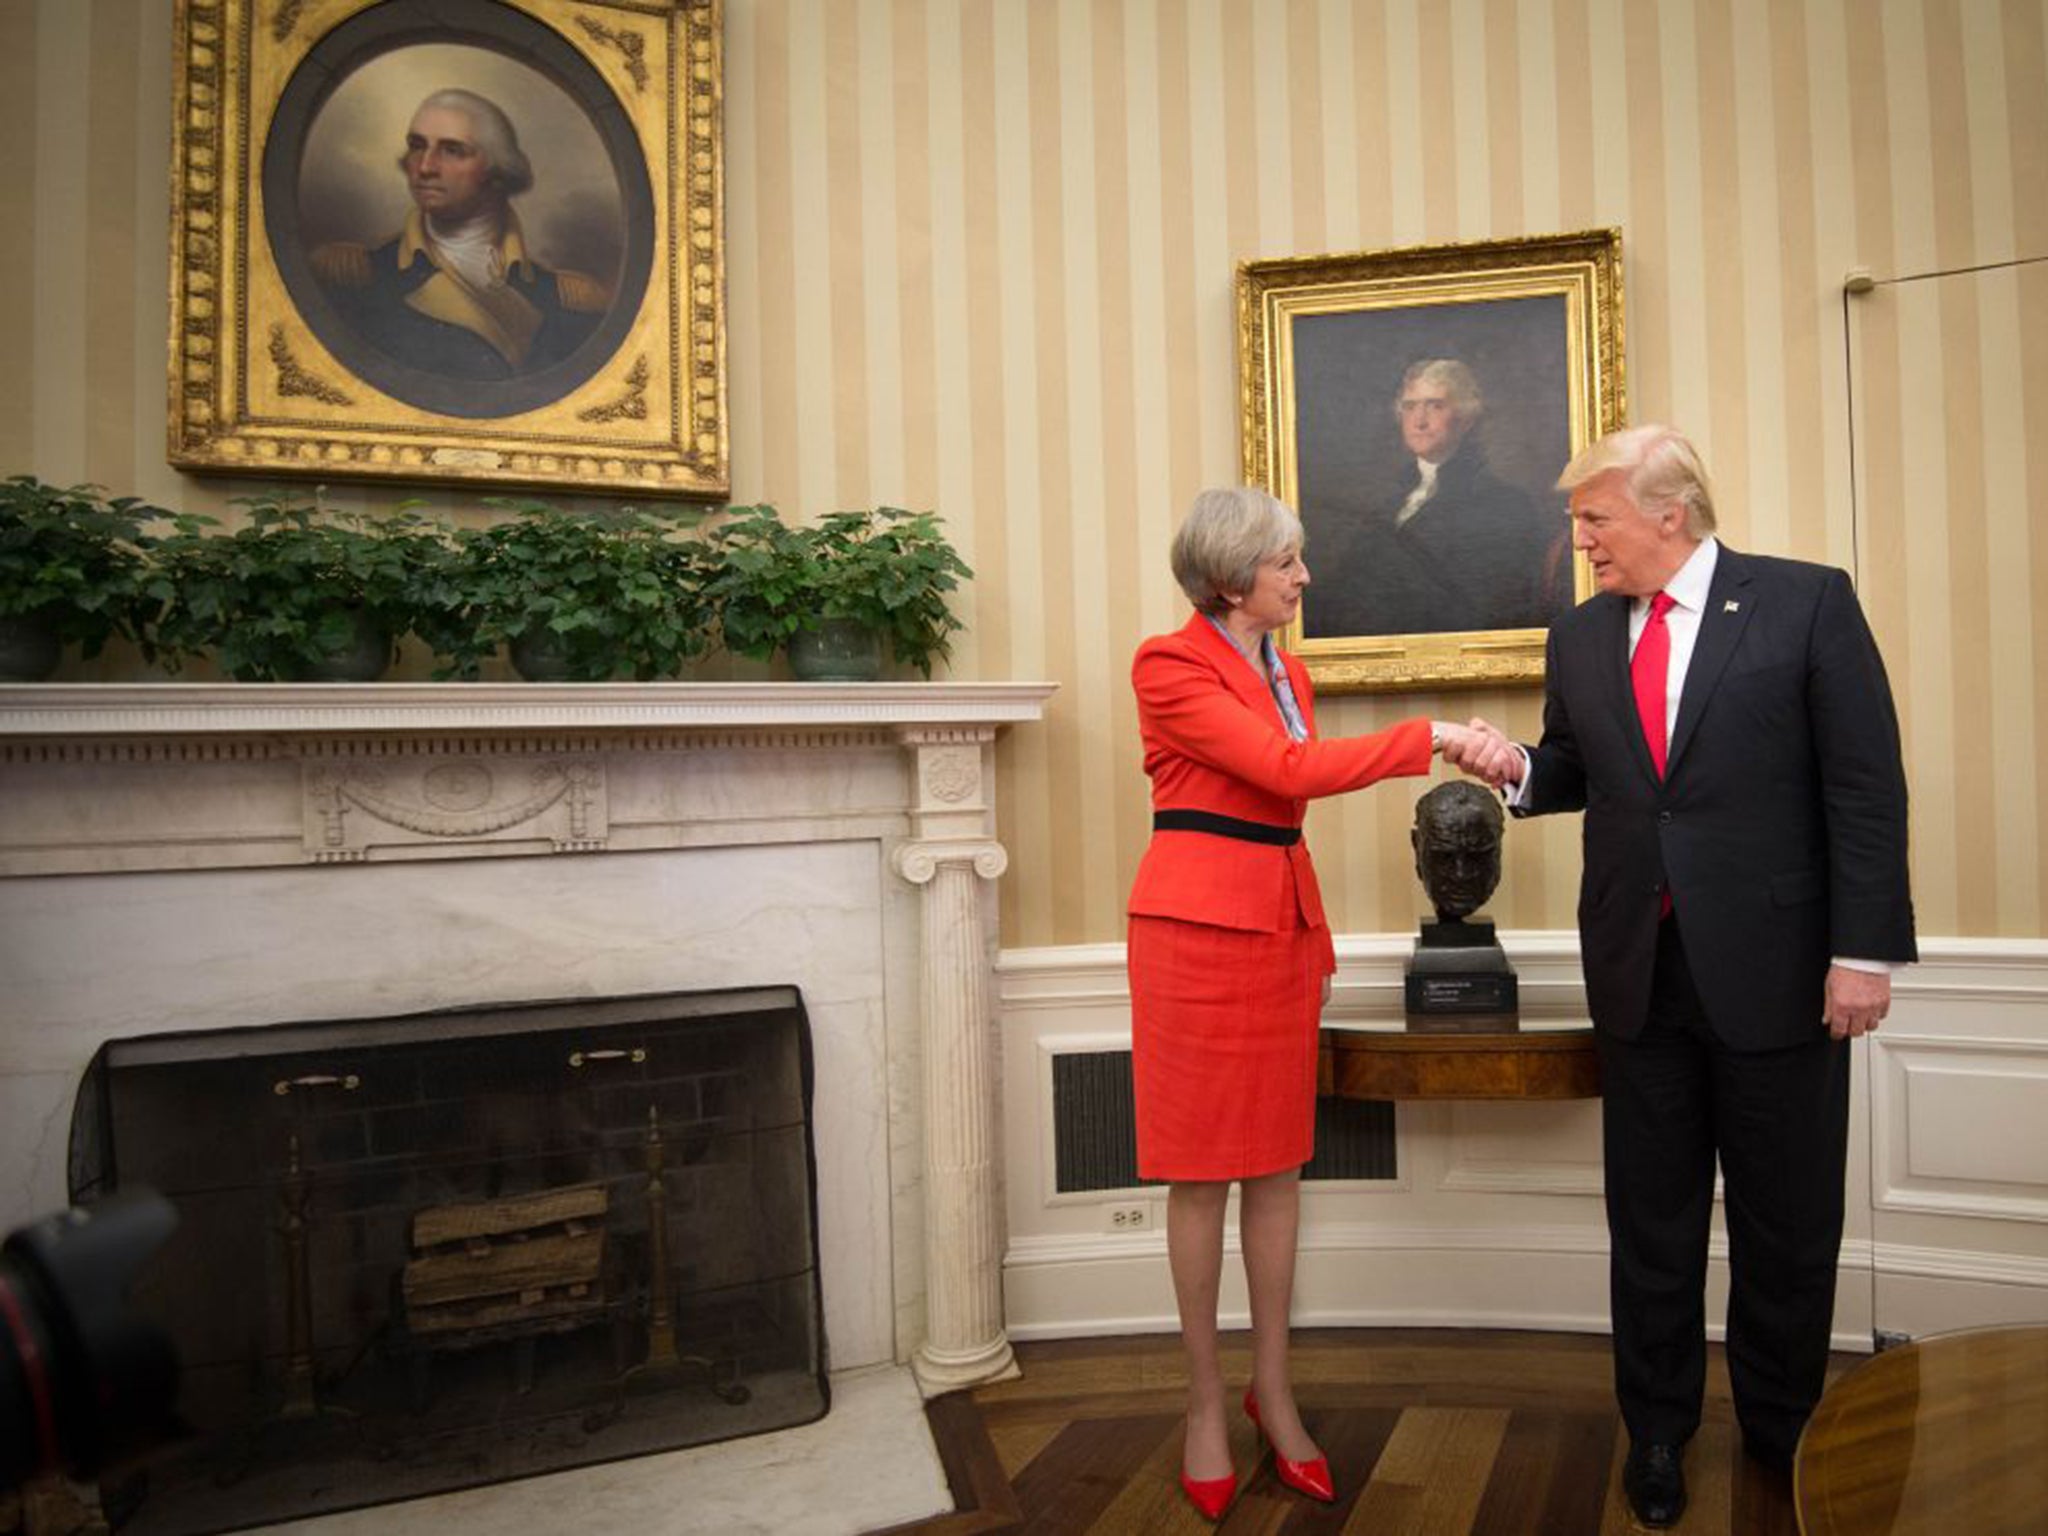 Ms May and the President in the Oval Office of the White House